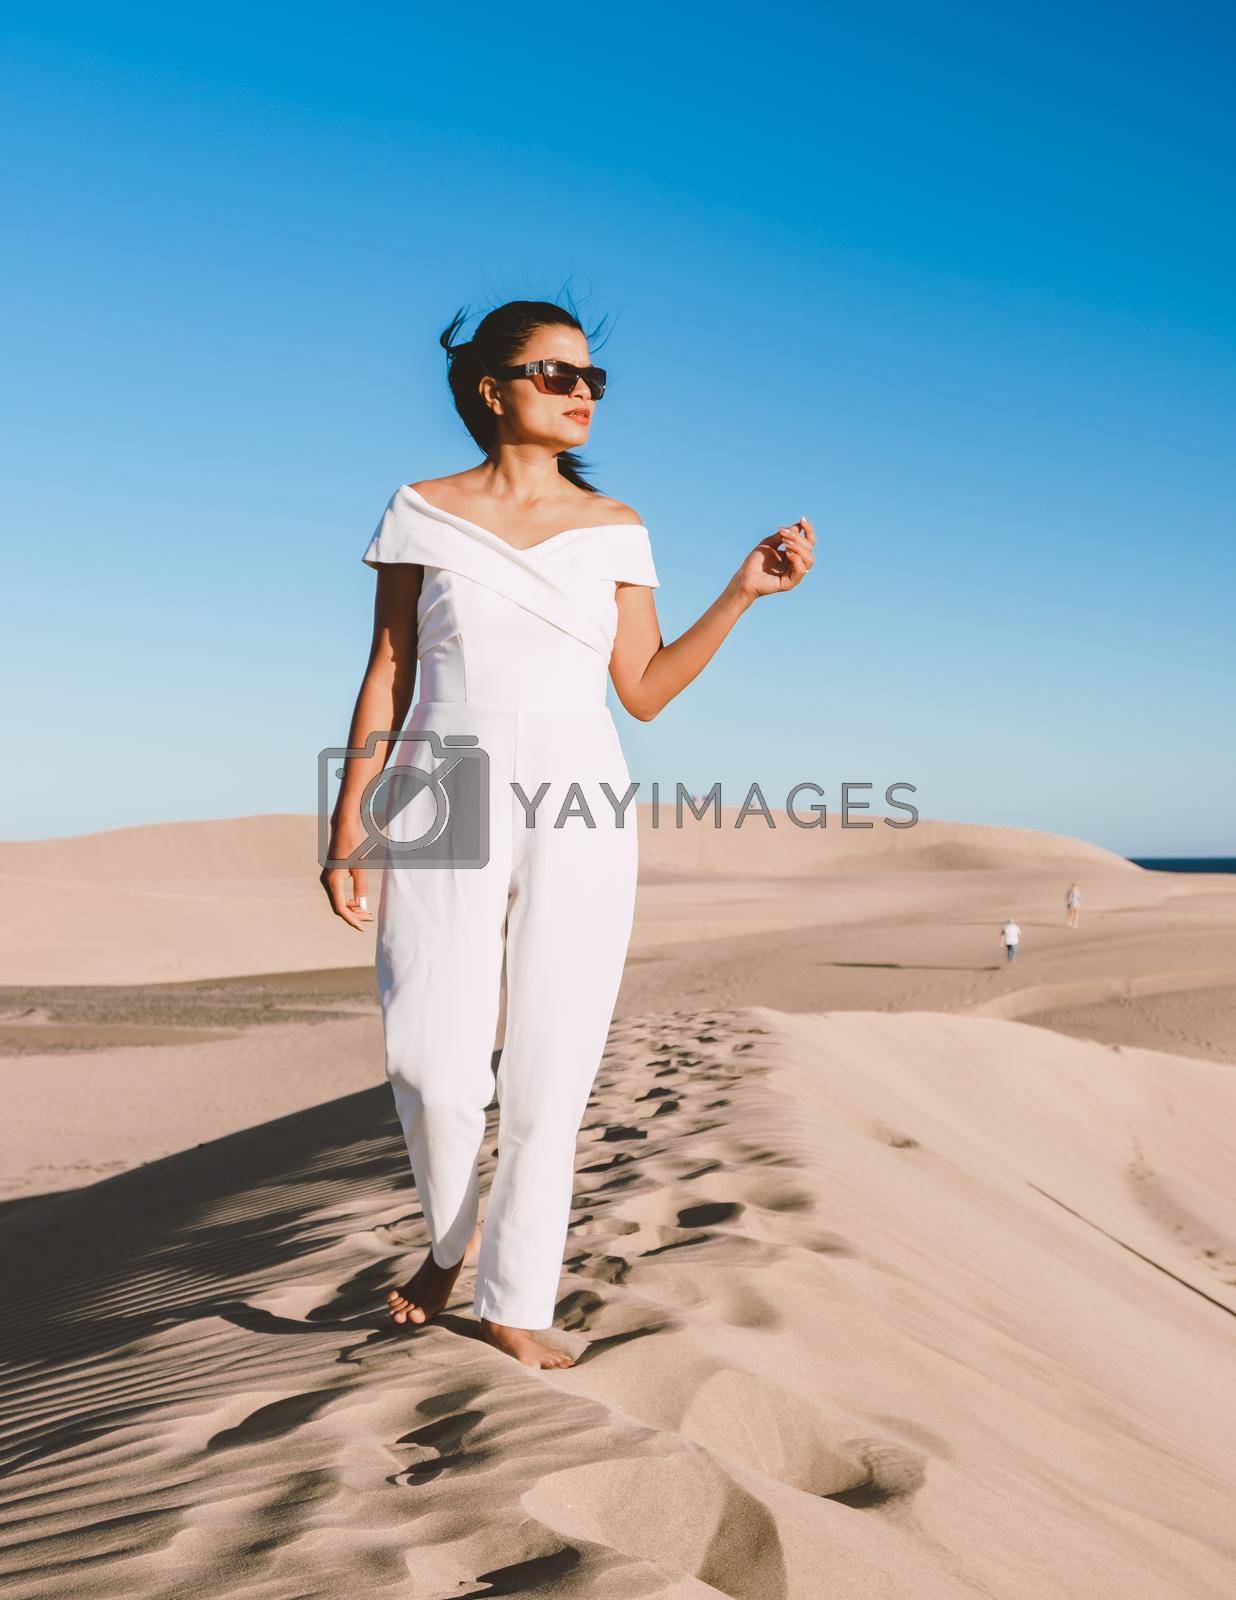 Royalty free image of young woman at the dessert of Maspalomas sand dunes Gran Canaria during vacation Canary Islands by fokkebok